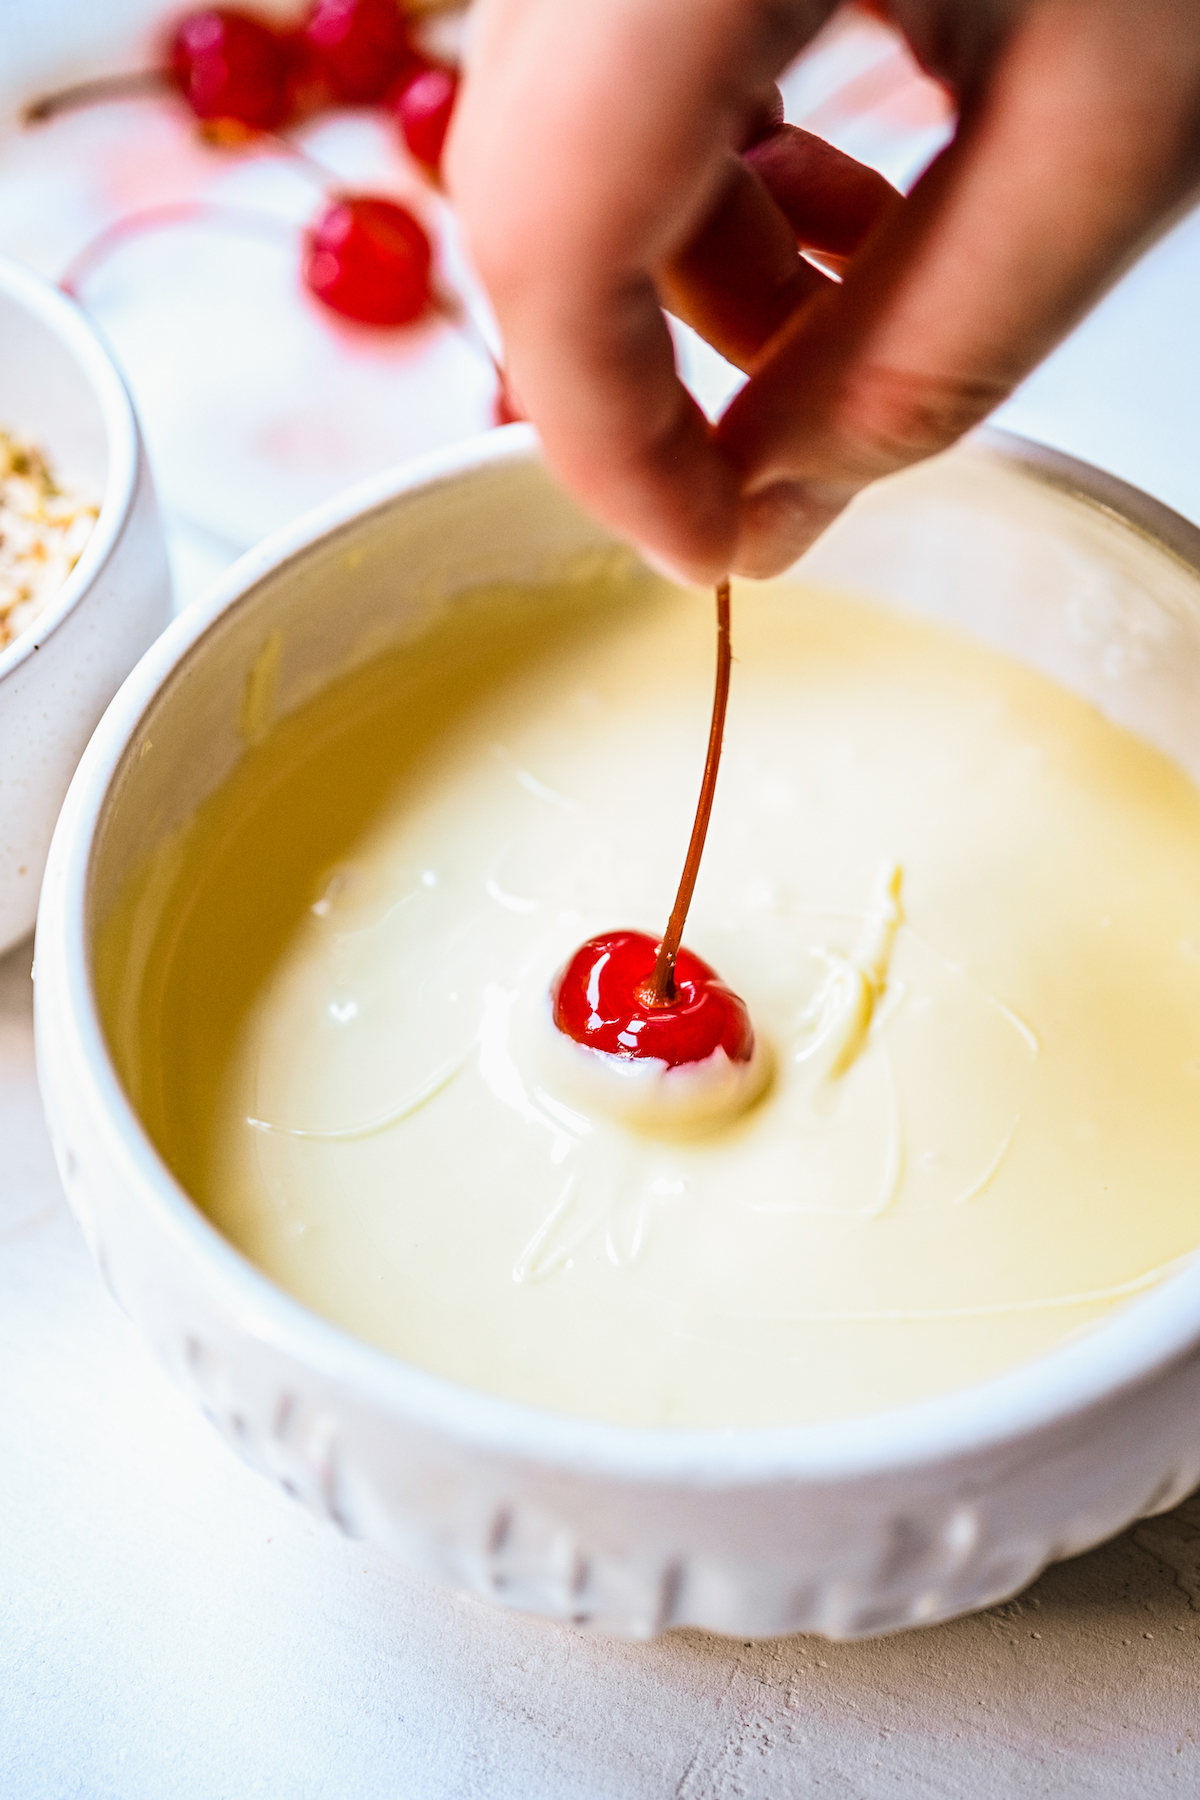 A cherry being dipped in melted white chocolate.